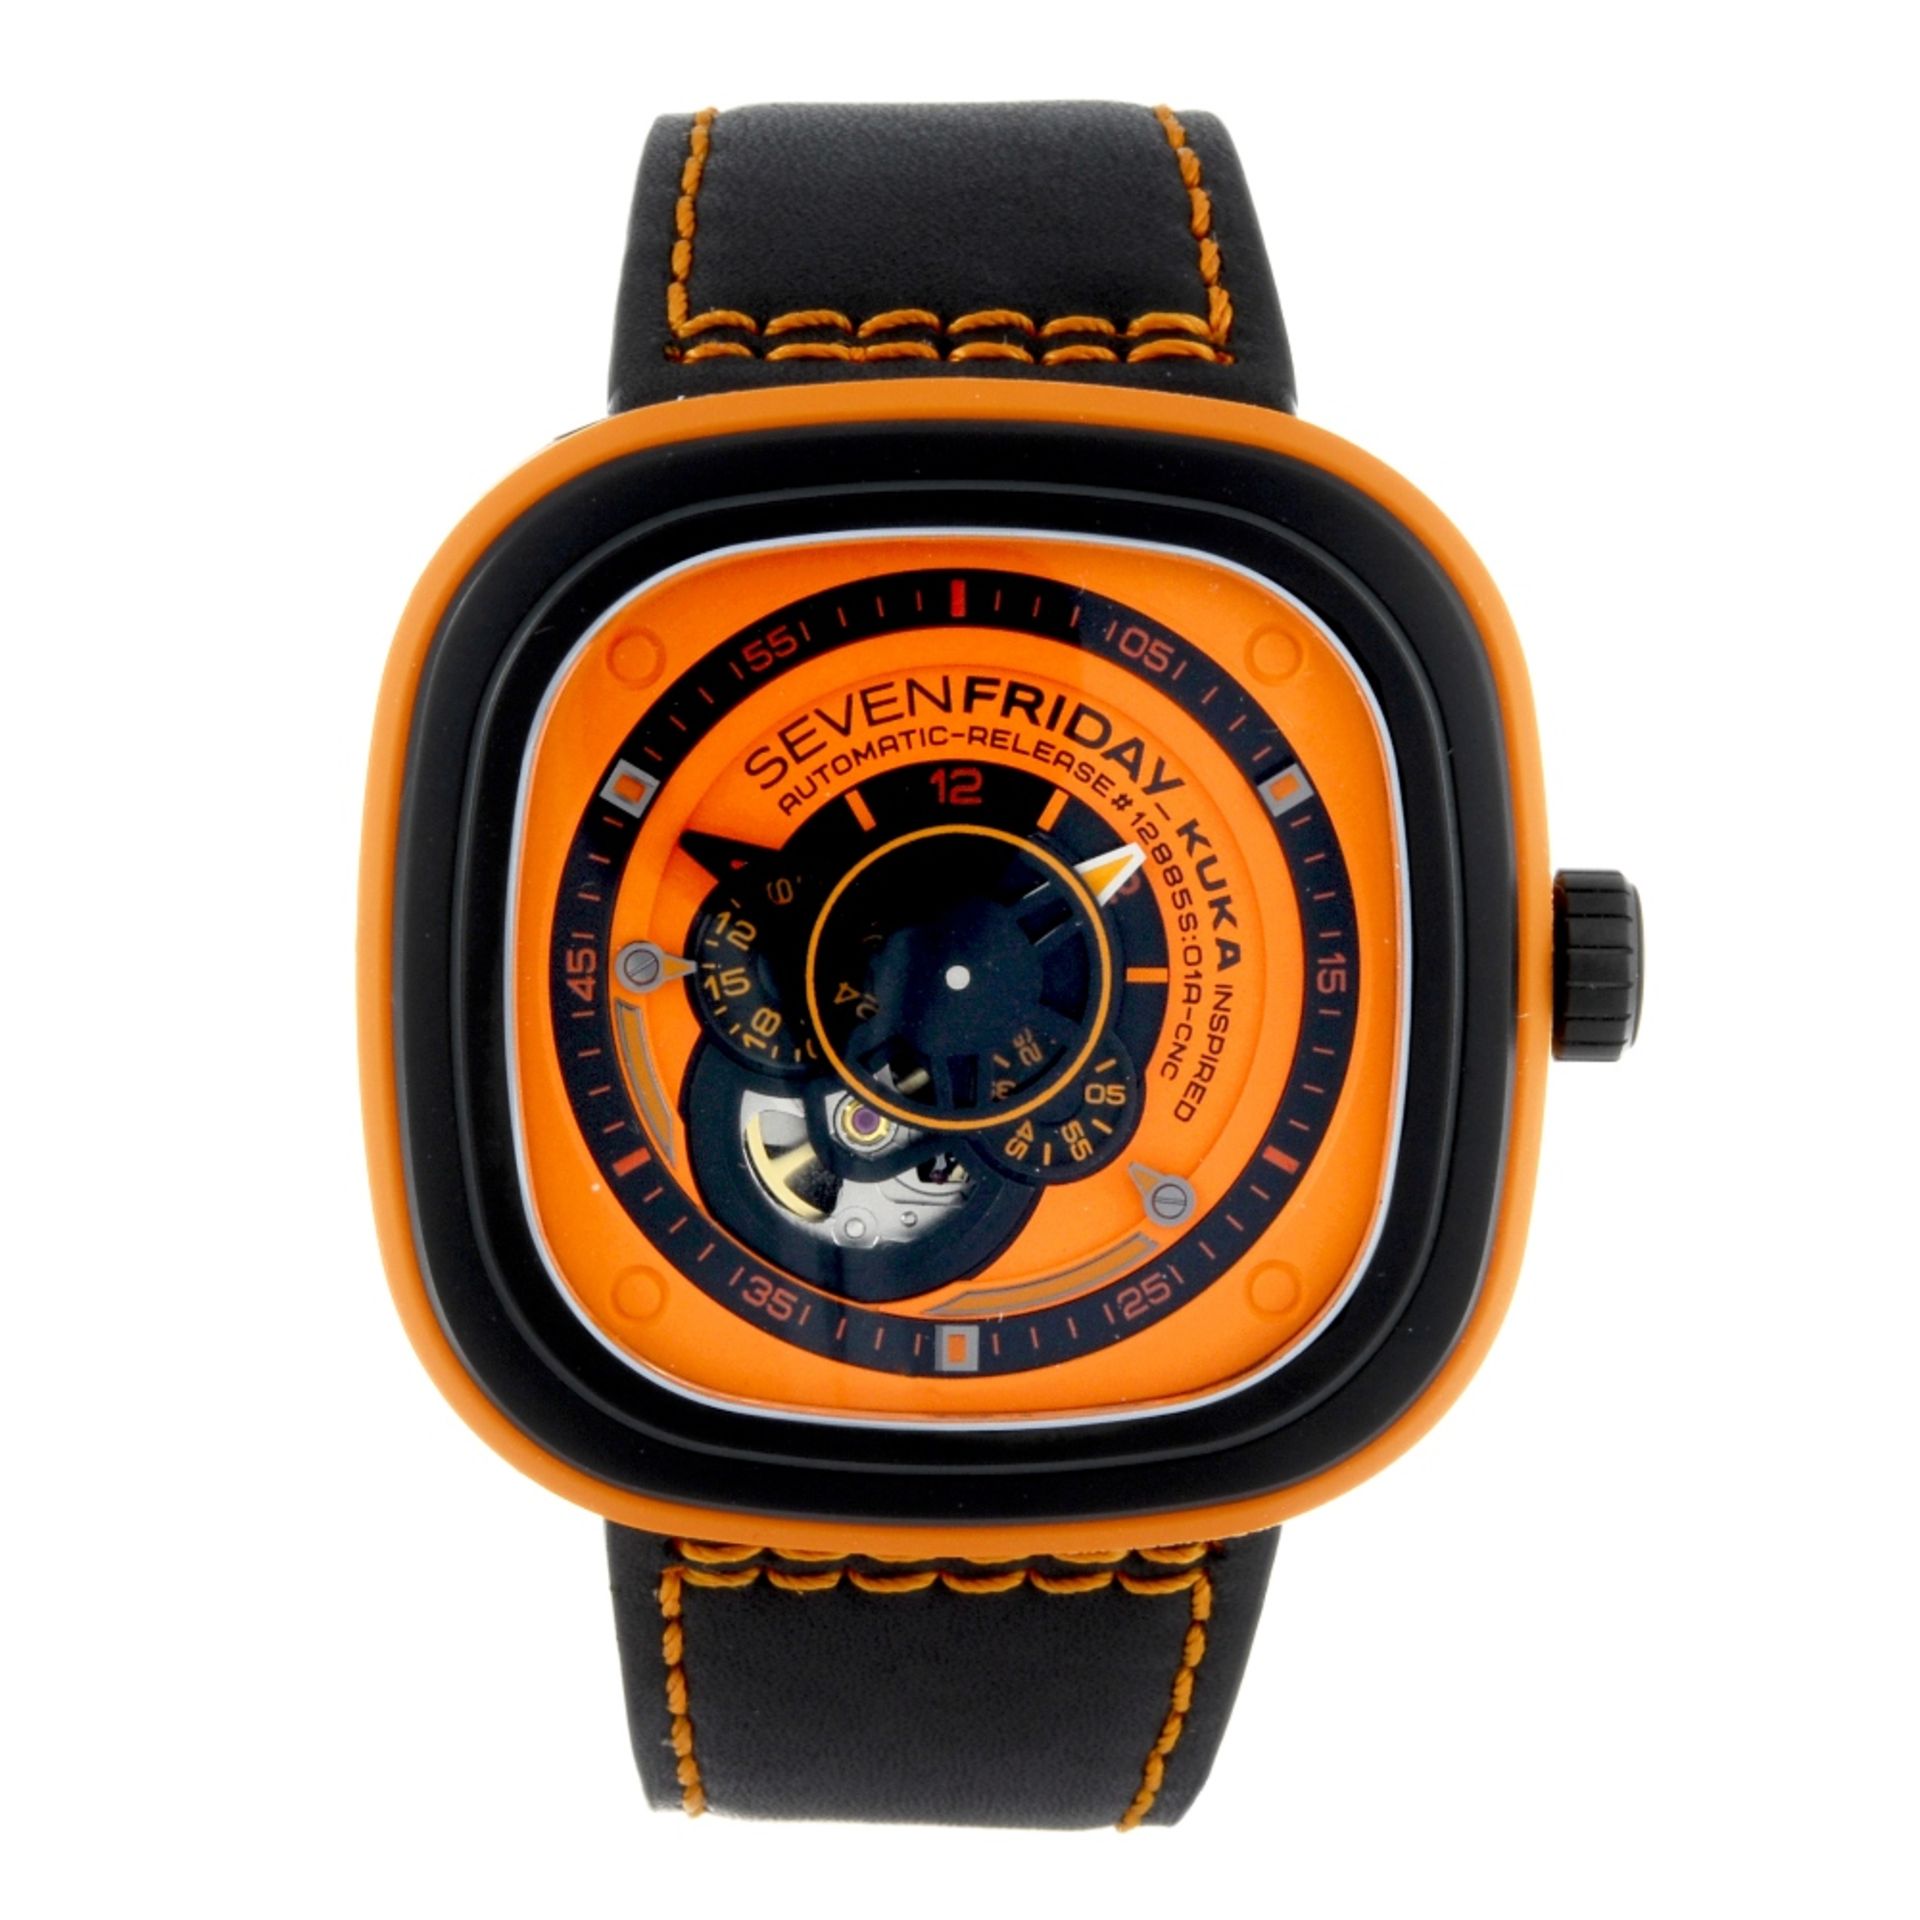 SEVENFRIDAY - a gentleman's wrist watch. PVD coated stainless steel and orange rubber case. Numbered